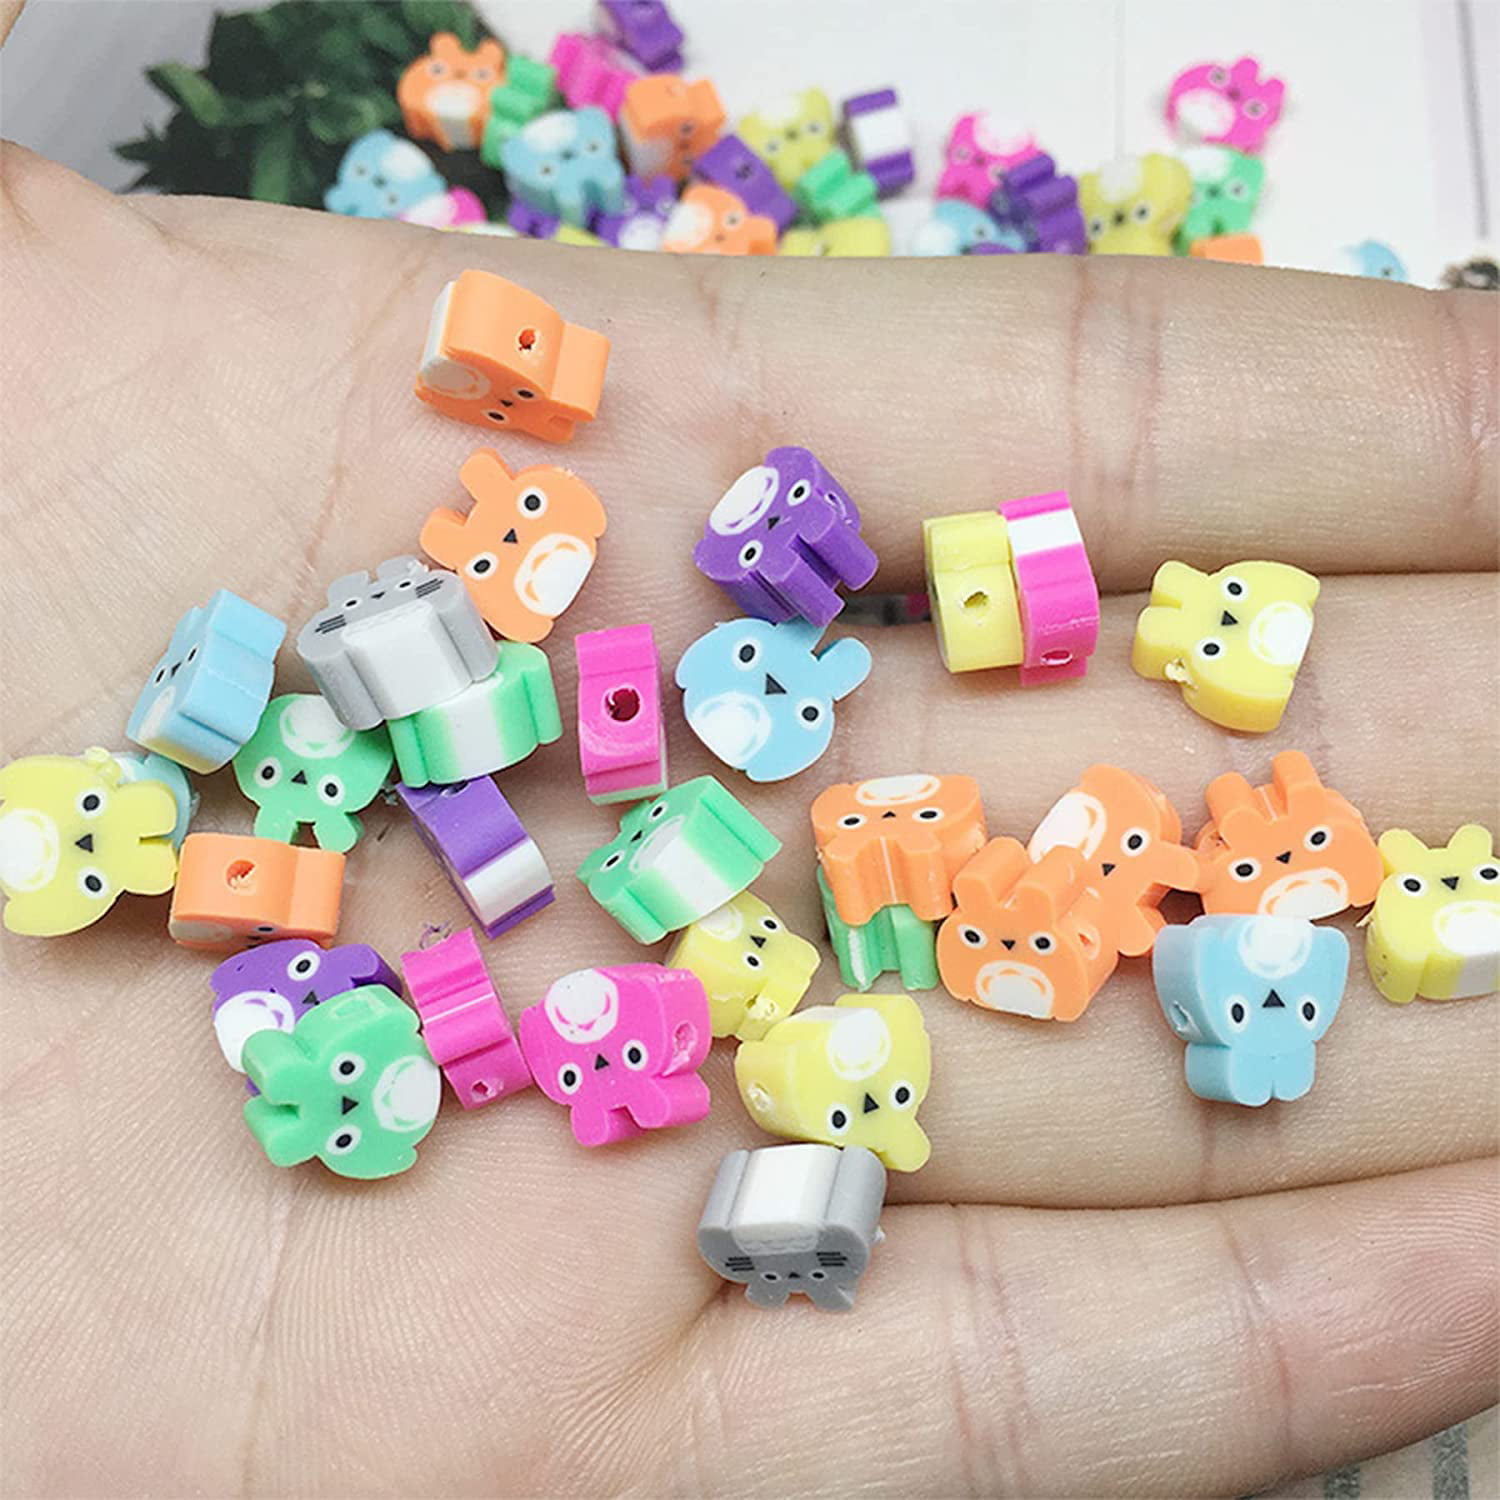 Gushu 200 Pcs Animal Clay Beads Charms for Bracelet Making Kit, Cute Flat  Polymer Heishi Spacer Animal Beads for Jewelry Necklace Earring Making